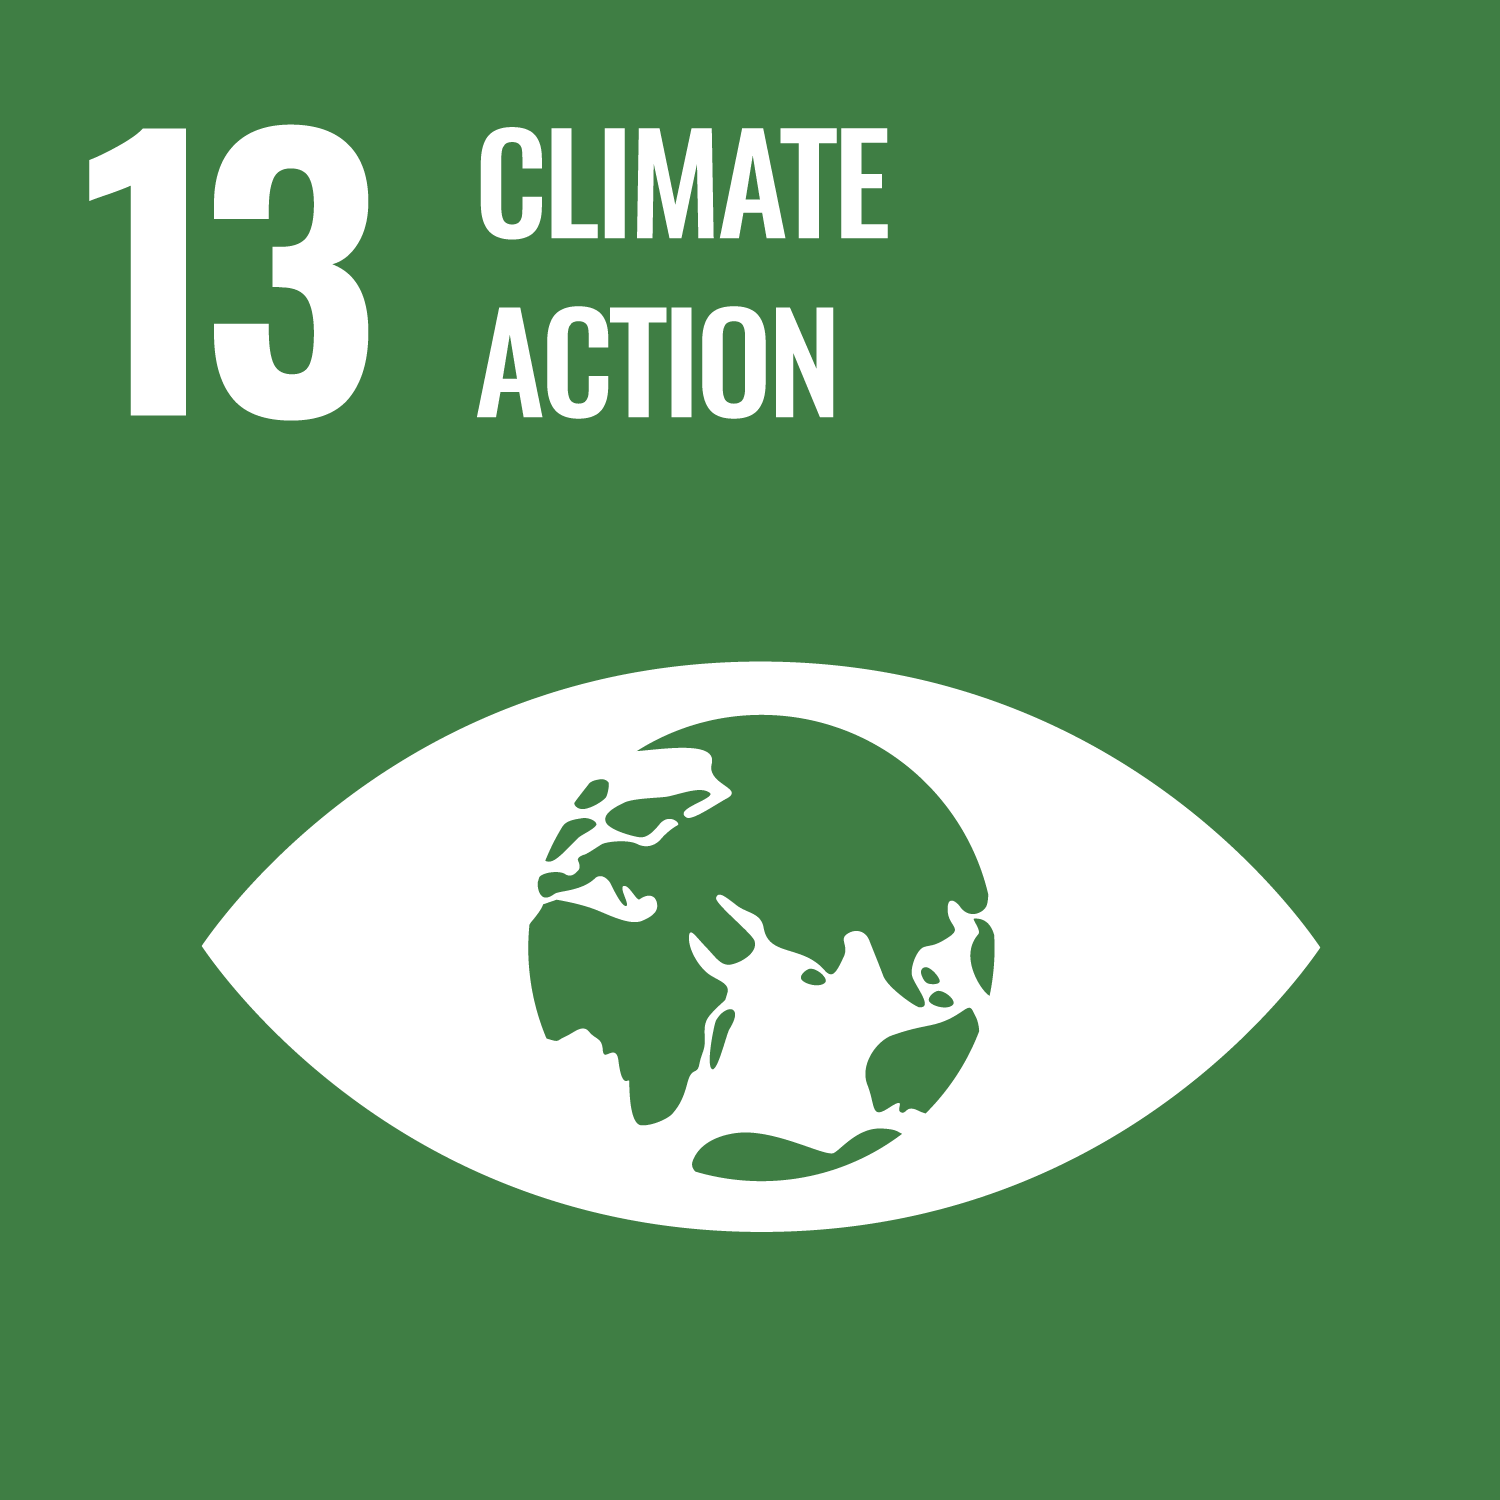 An icon of UN SDG #13 - Climate Action. It depicts a drawing of an eye with a drawing of a globe in the middle against a dark green background.